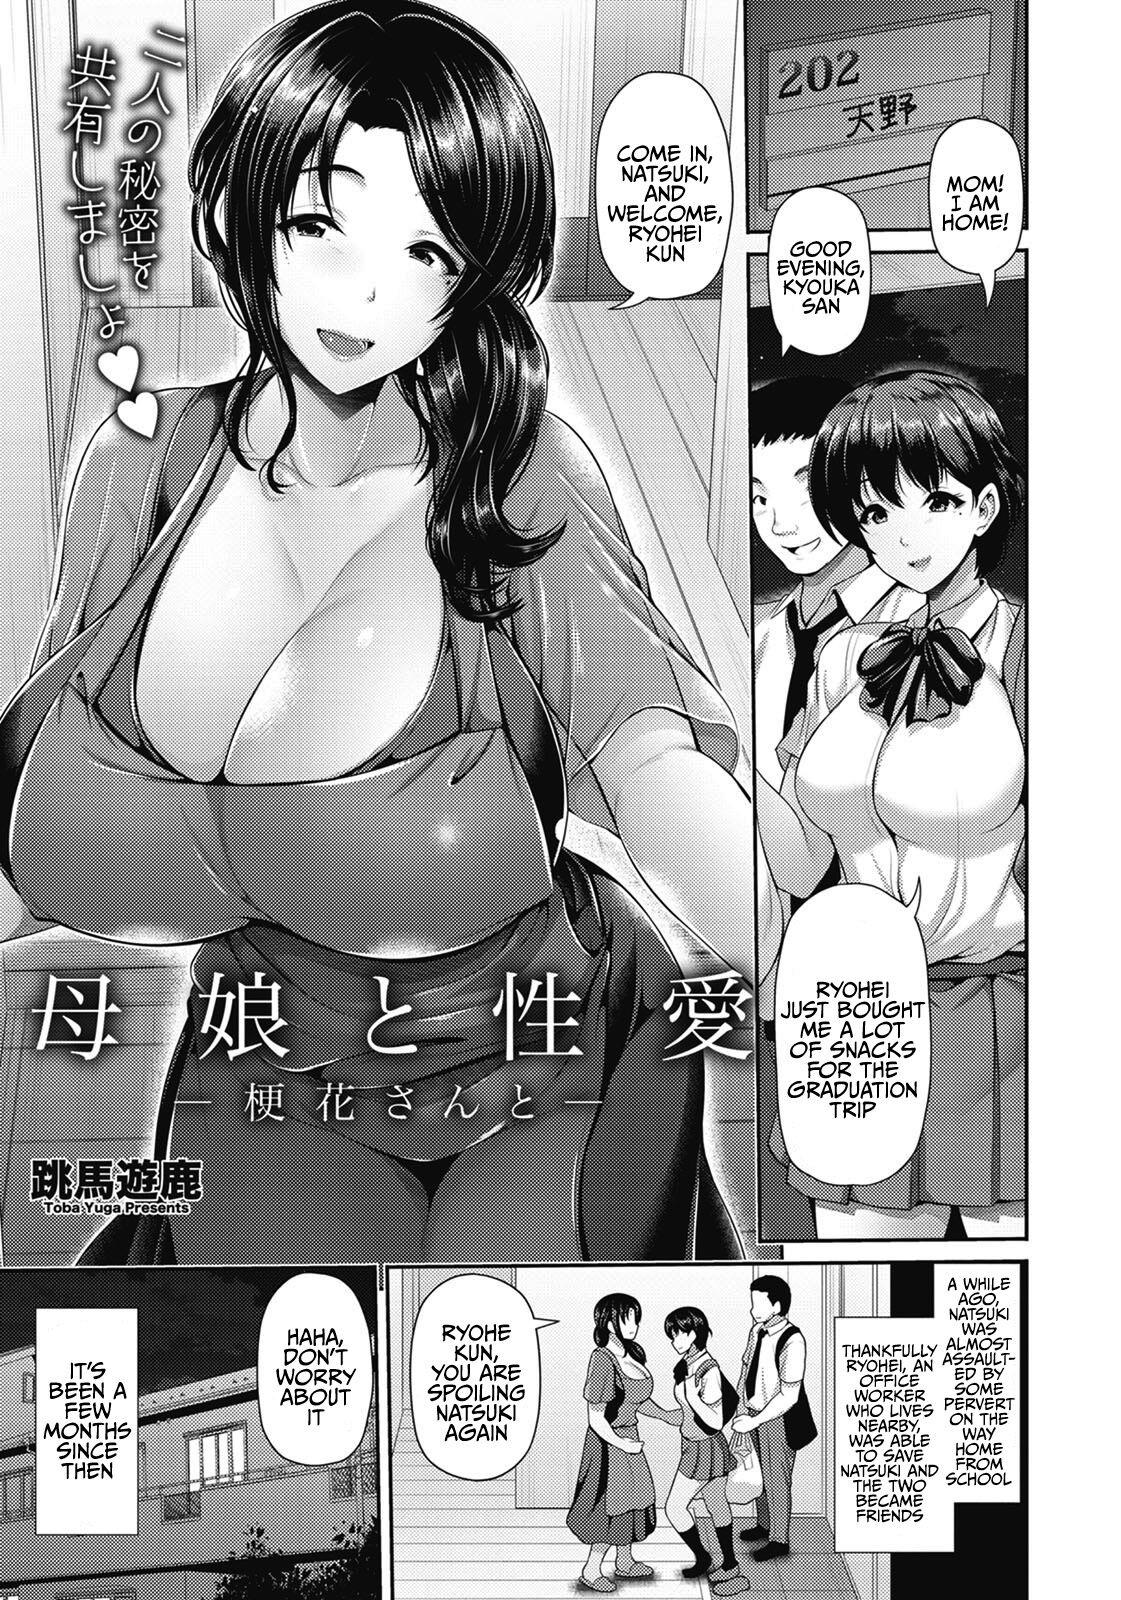 Oyako to Seiai | Sexual Relations with Mother and Daughter ~ Kyouka San 1